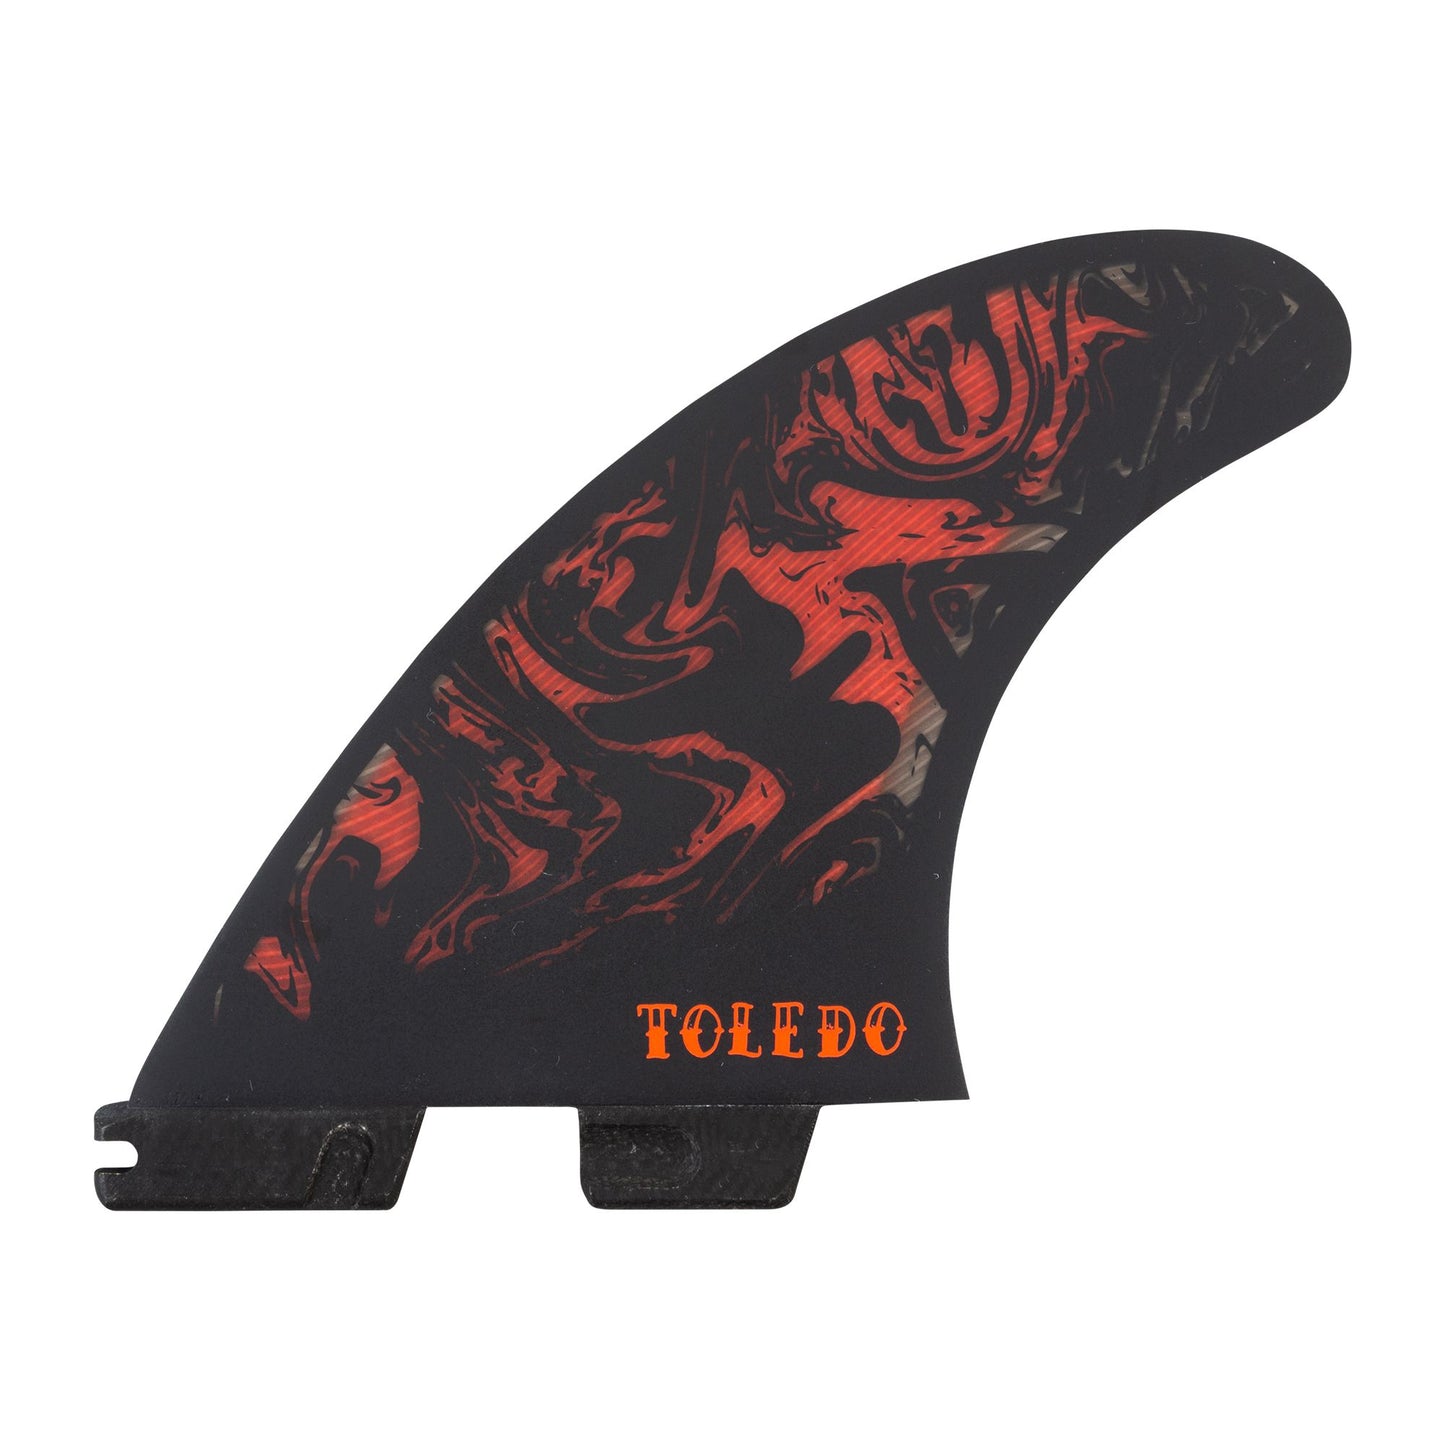 FCS II FT FILIPE TOLEDO PC LARGE TRI FIN SET in black and red showing rear fin